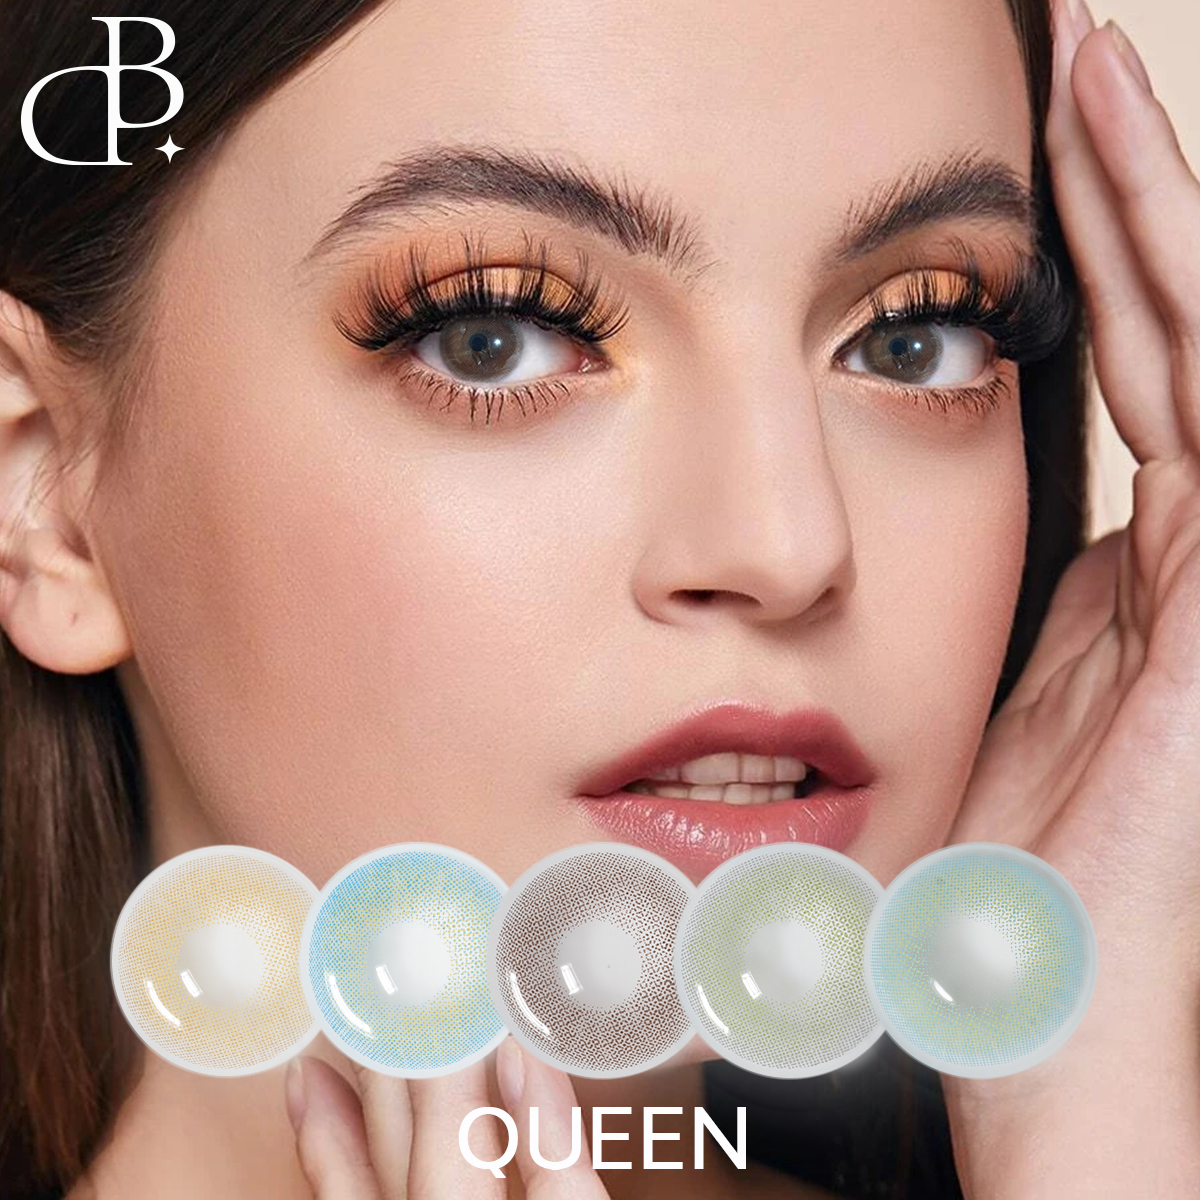 QUEEN Eye Lenses Color Contact Lenses dbeyes contact lenses Wholesale Customize Yearly Cosmetic Gray brown Nature Soft Quantity fast delivery